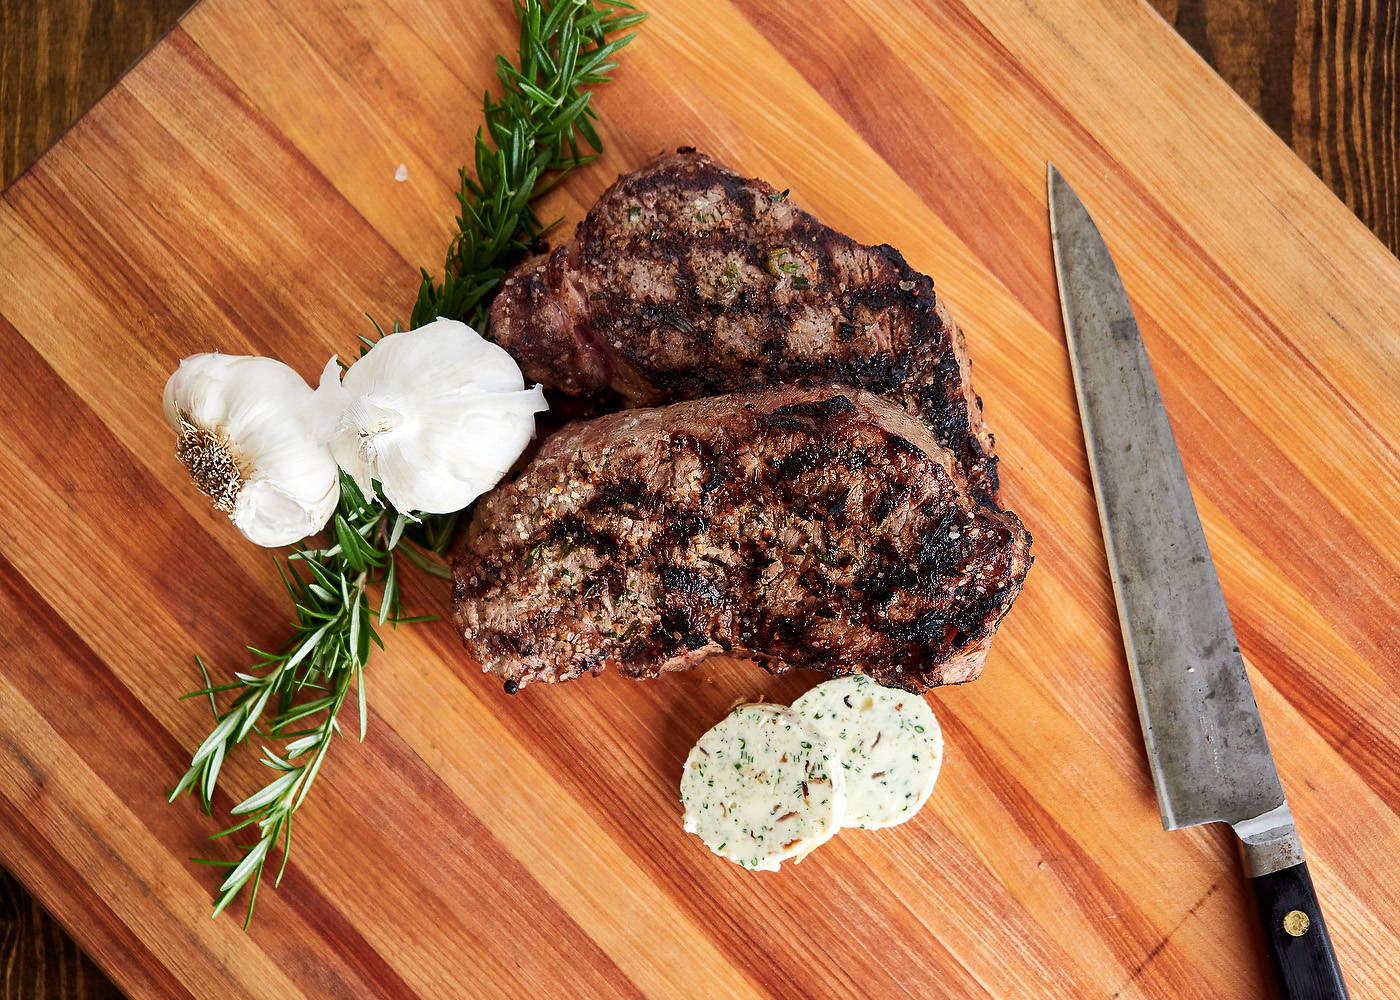 Table & Twine's Chefs' Top 5 Grilling Tips